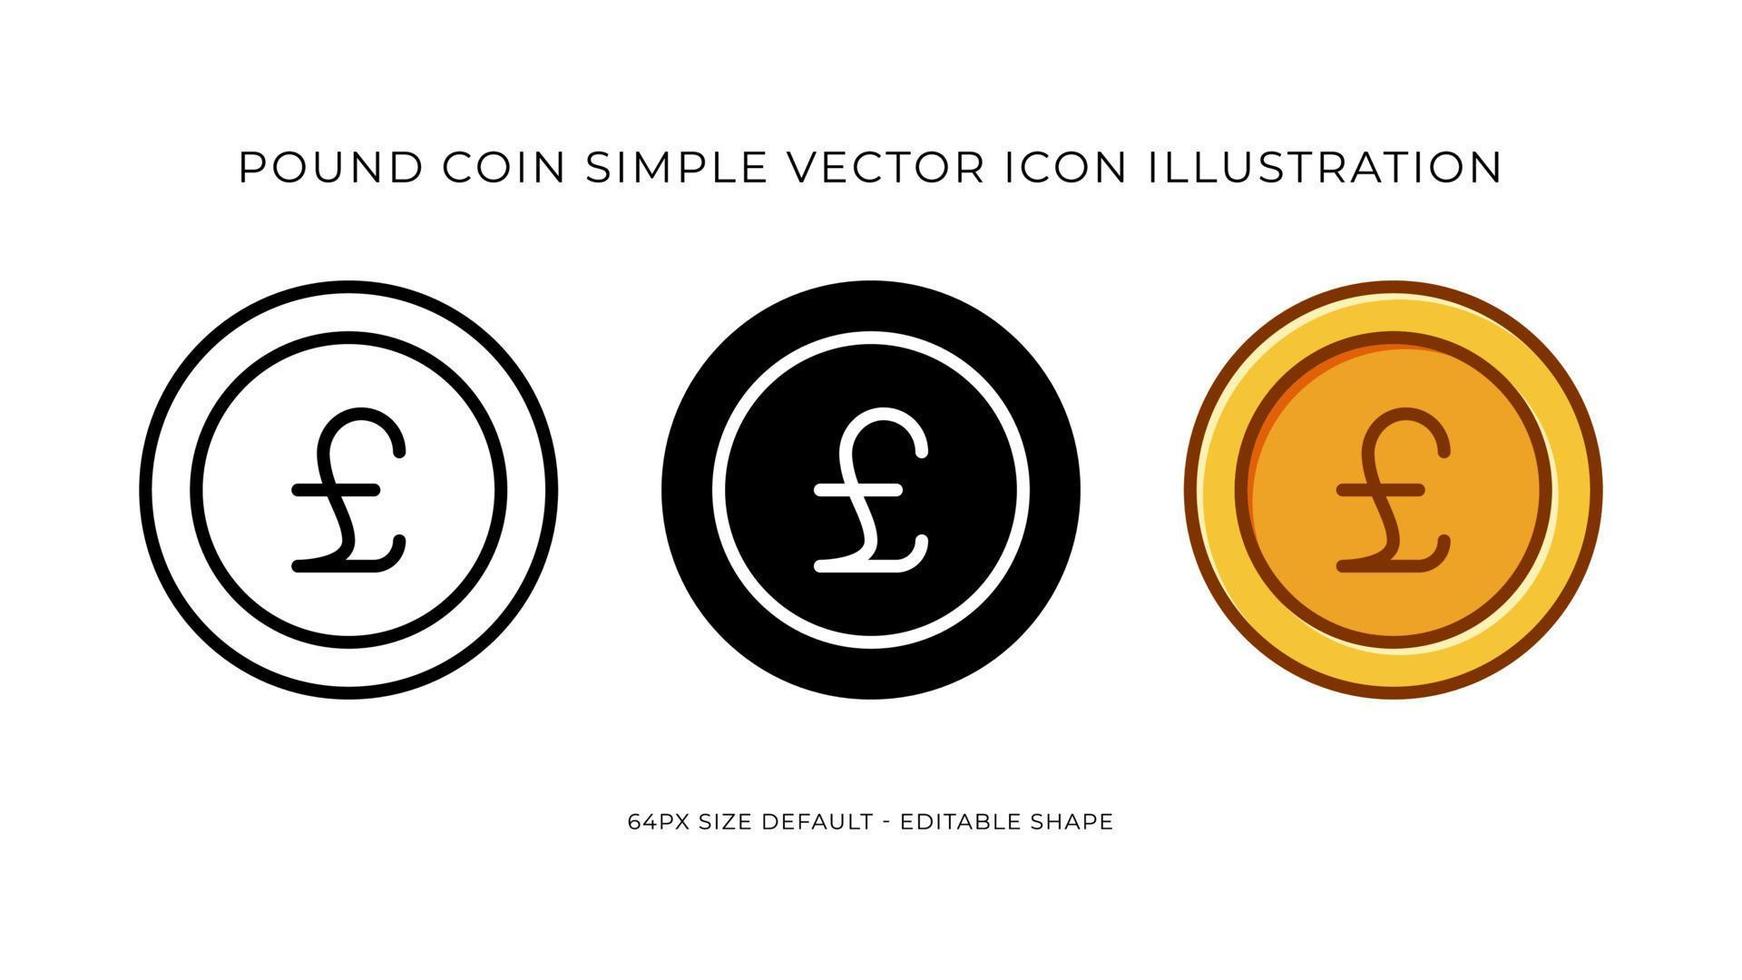 Pound Coin Simple Vector Icon Illustration